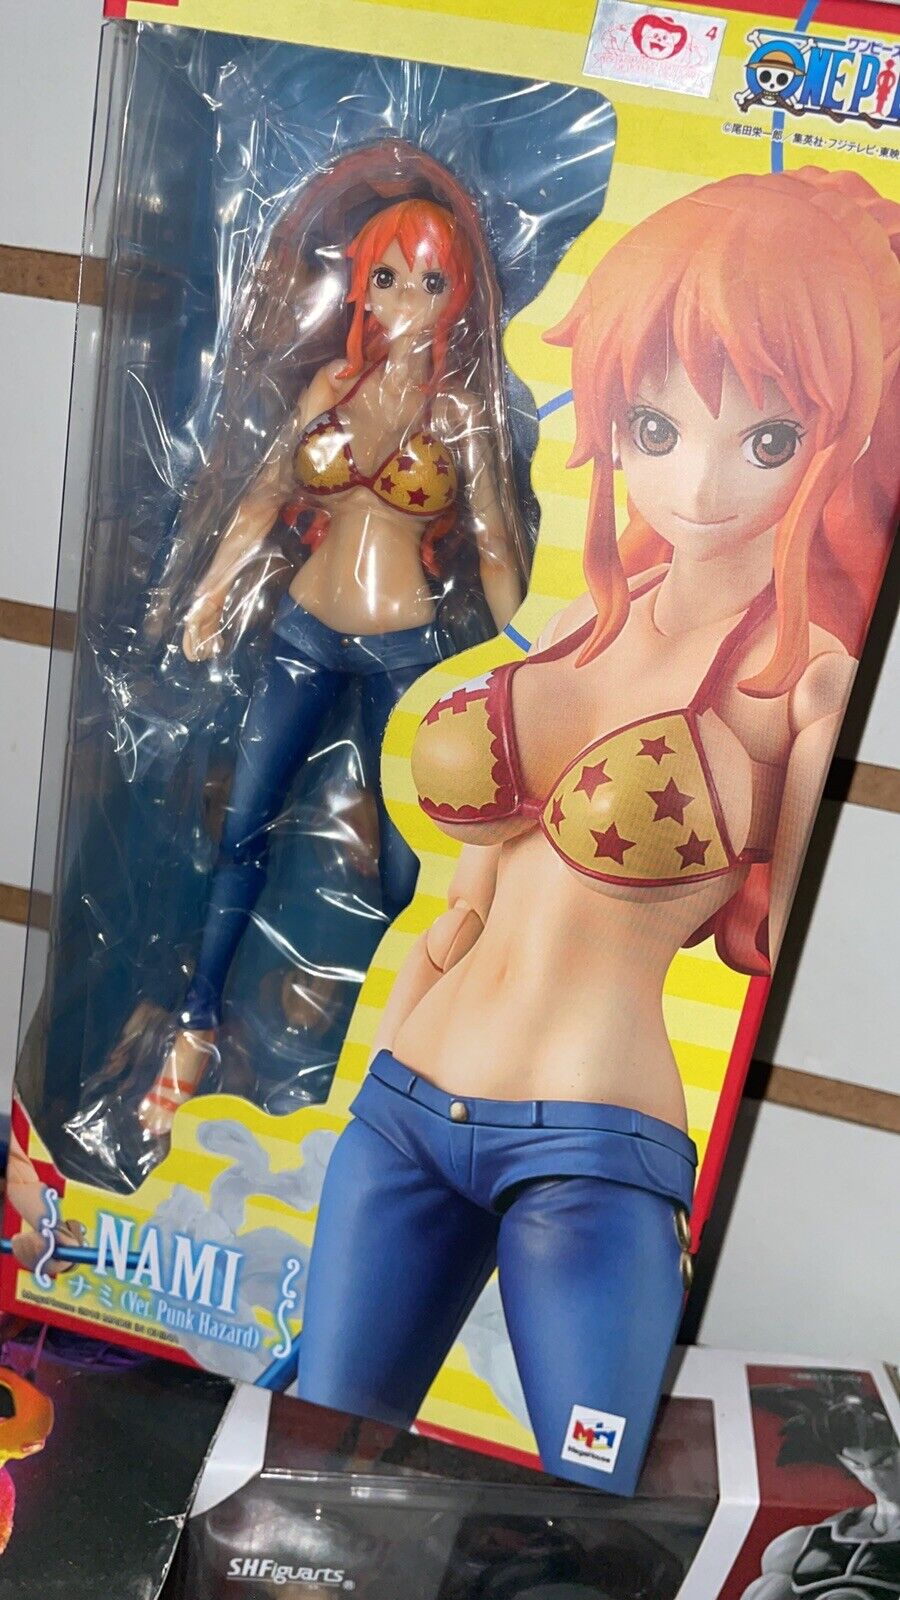 New Variable Action Heroes ONE PIECE Nami Punk Hazard Ver. figure Megahouse